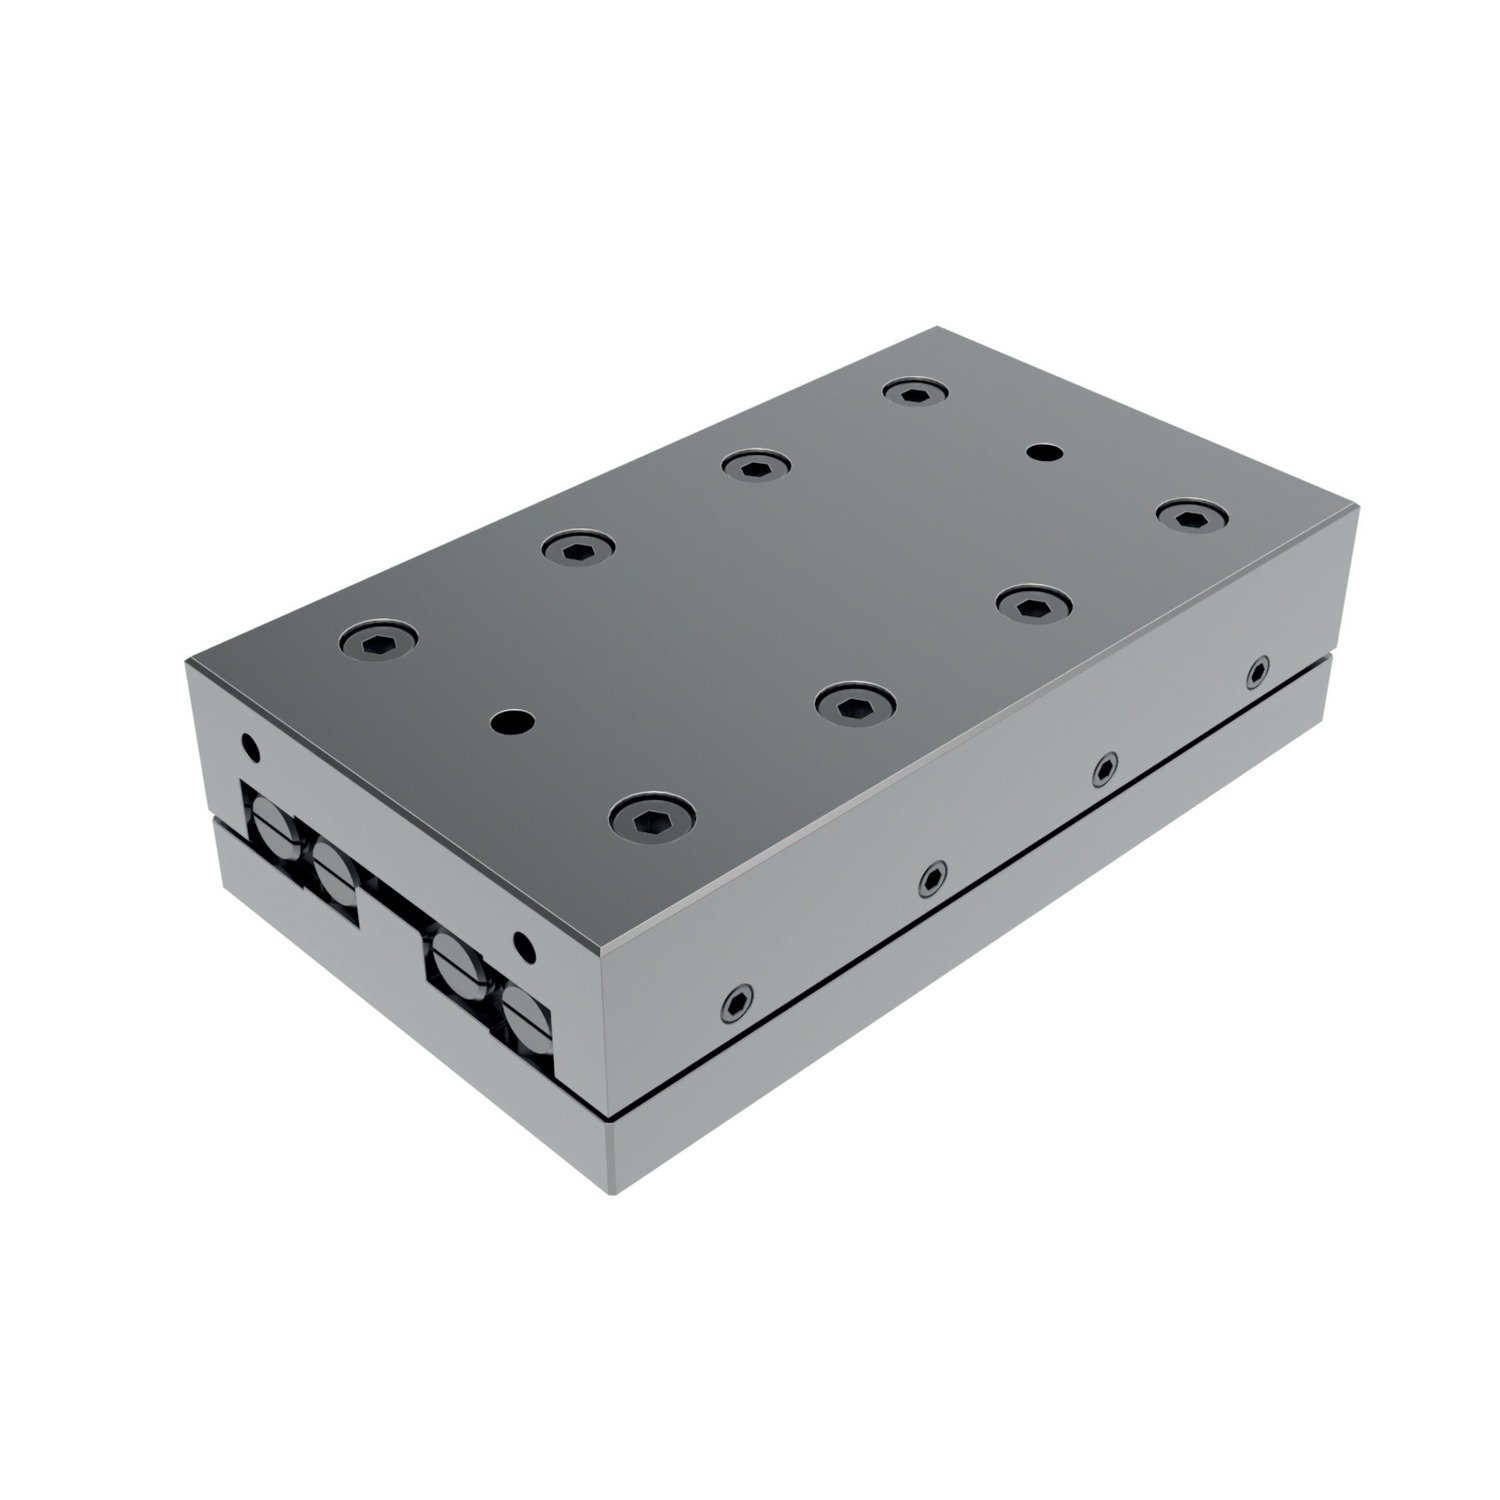 Crossed Roller Slide Assemblies Linear tables (in steel or lightweight aluminium) provide linear motion for light/medium loads. Heavy-duty versions also available.